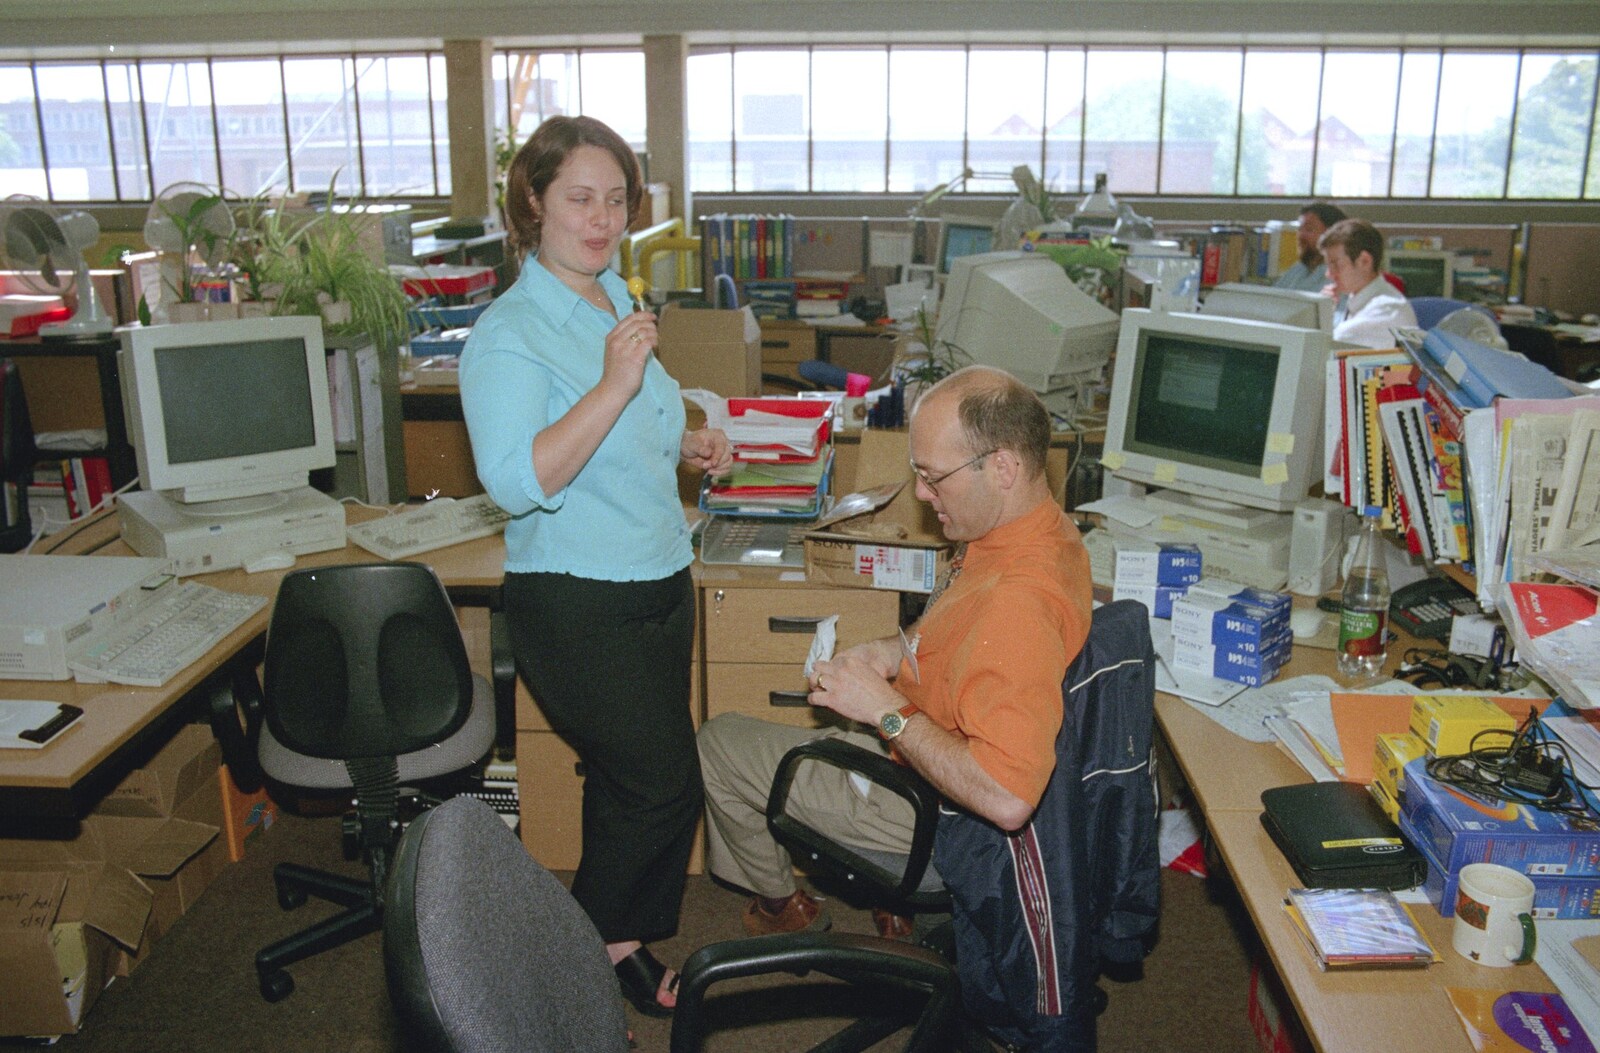 A Last Few Days at CISU, Suffolk County Council, Ipswich - 11th June 2000: Guy Girardeau sits down as a lollipop is waved at him